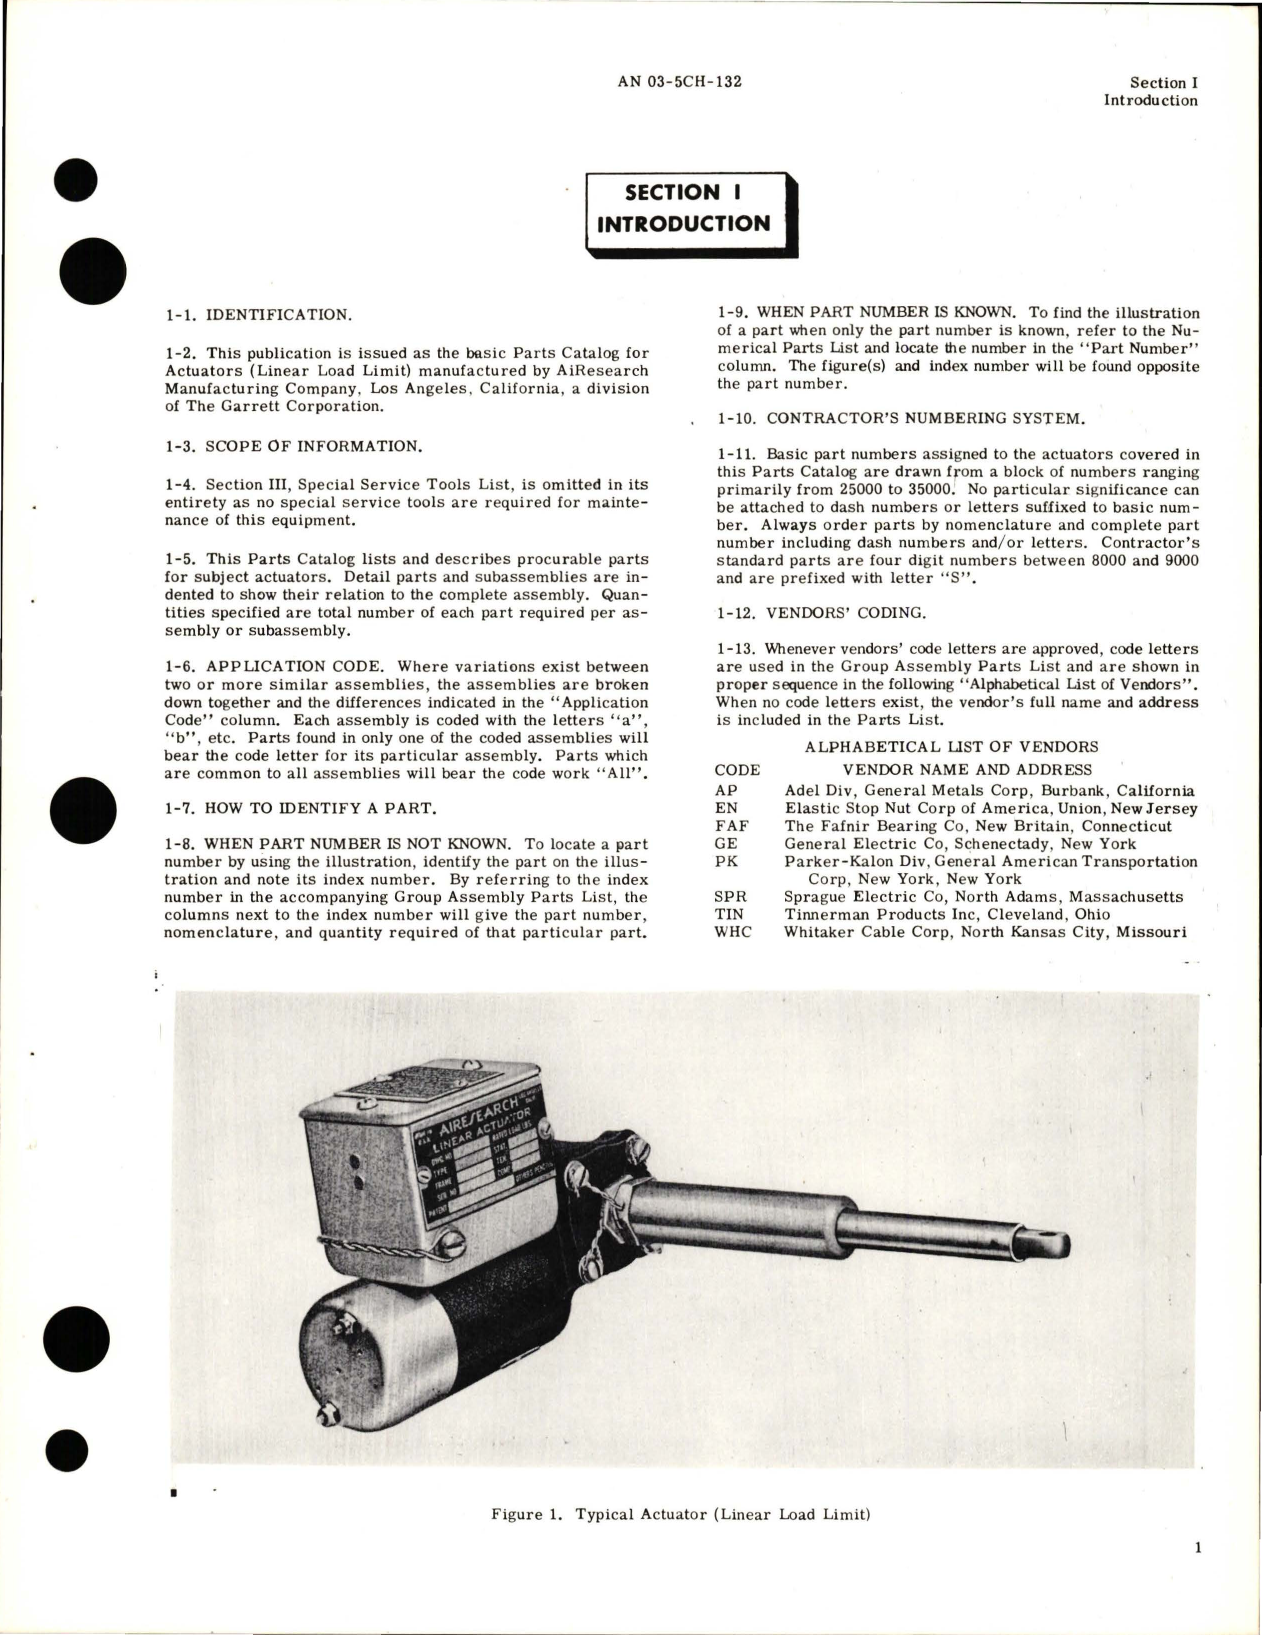 Sample page 5 from AirCorps Library document: Parts Catalog for Linear Load Limit Actuators